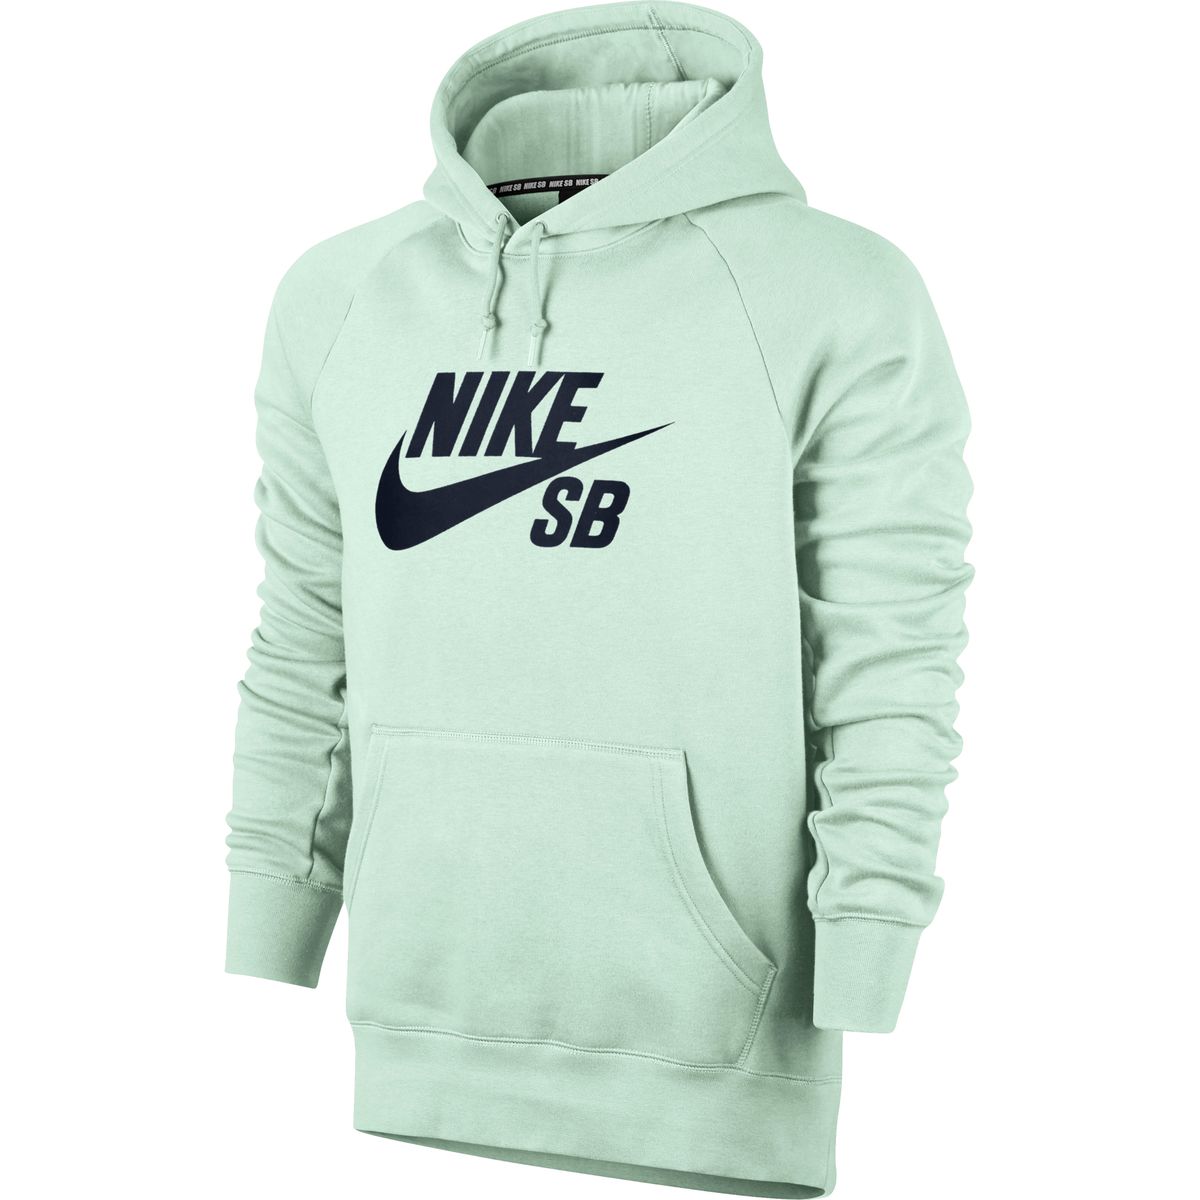 Nike SB Icon Pullover Hoodie - Men's - Clothing